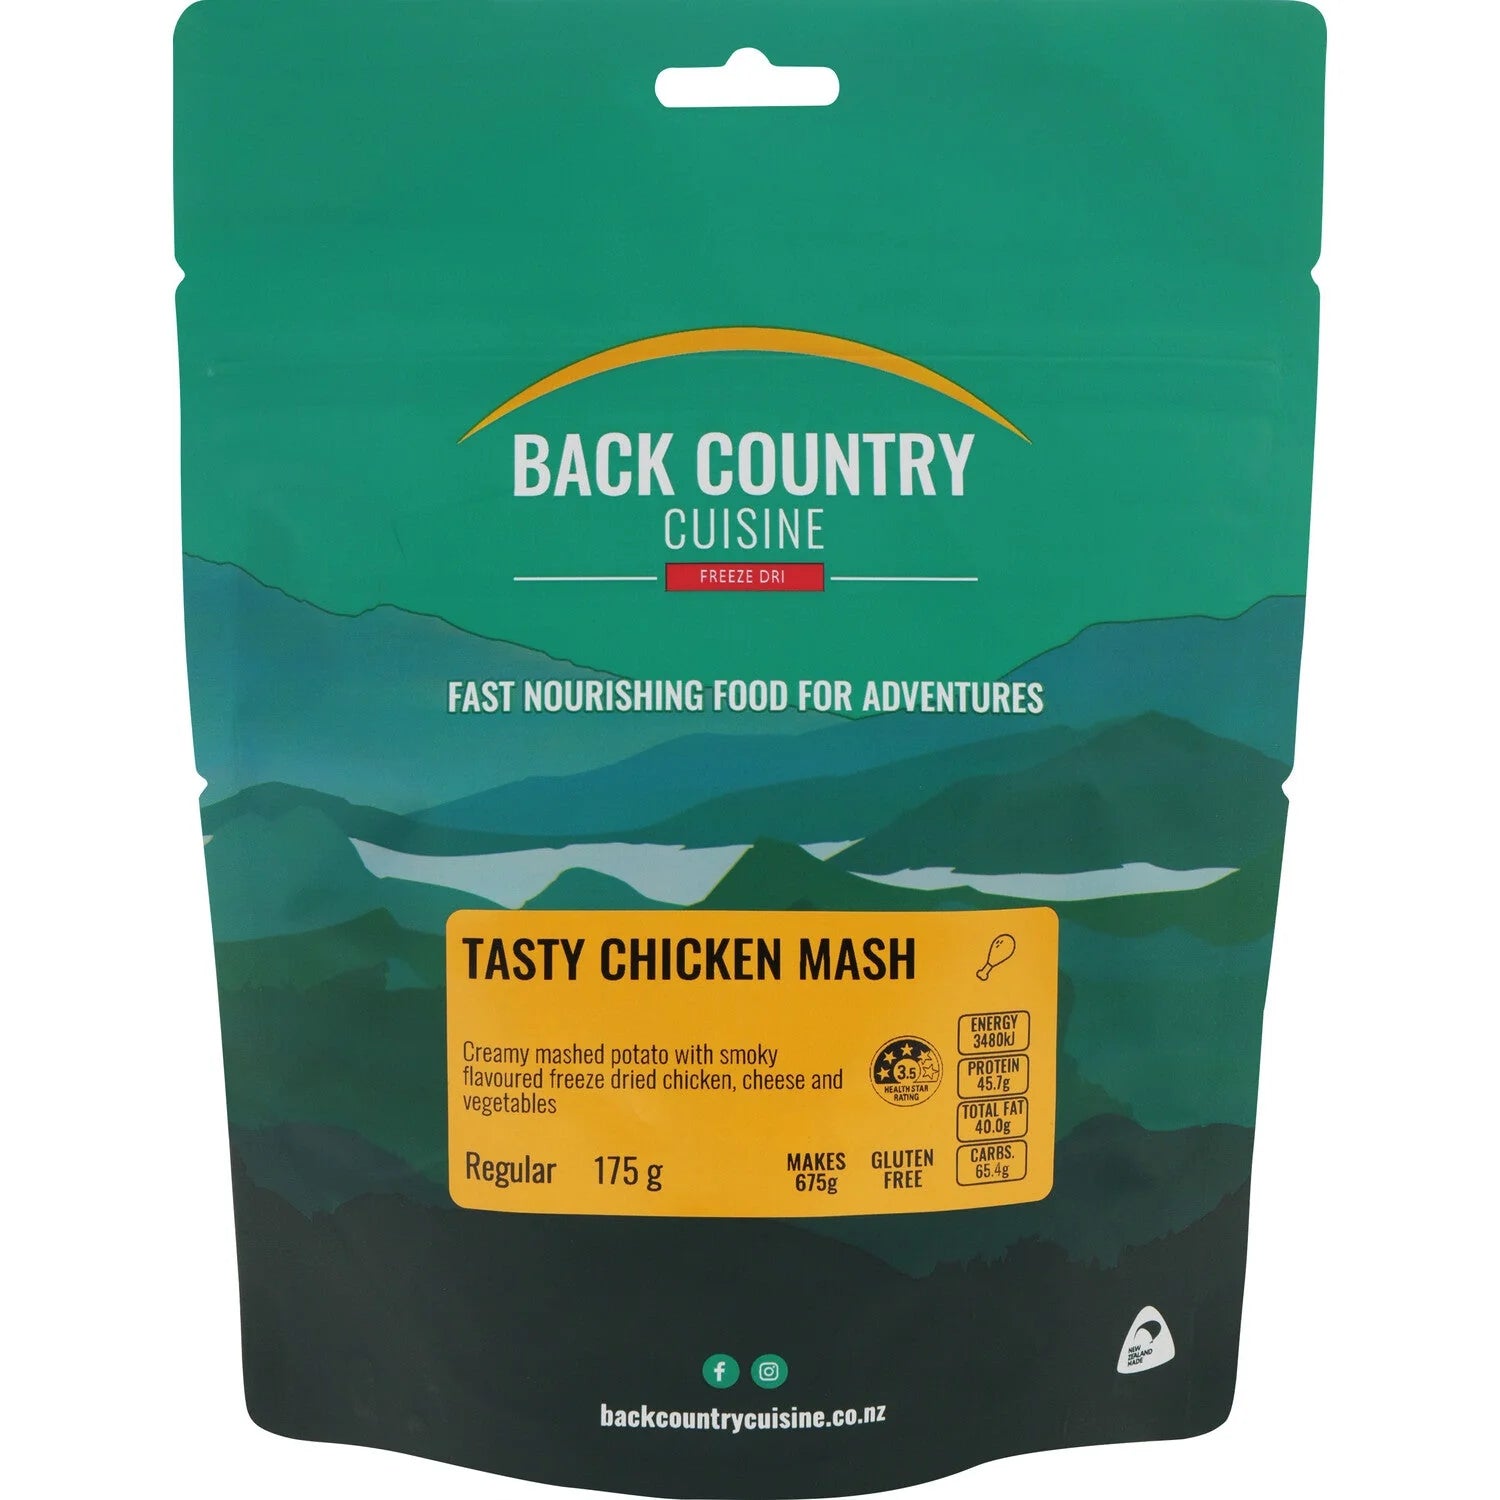 Back Country Cuisine - Tasty Chicken Mash